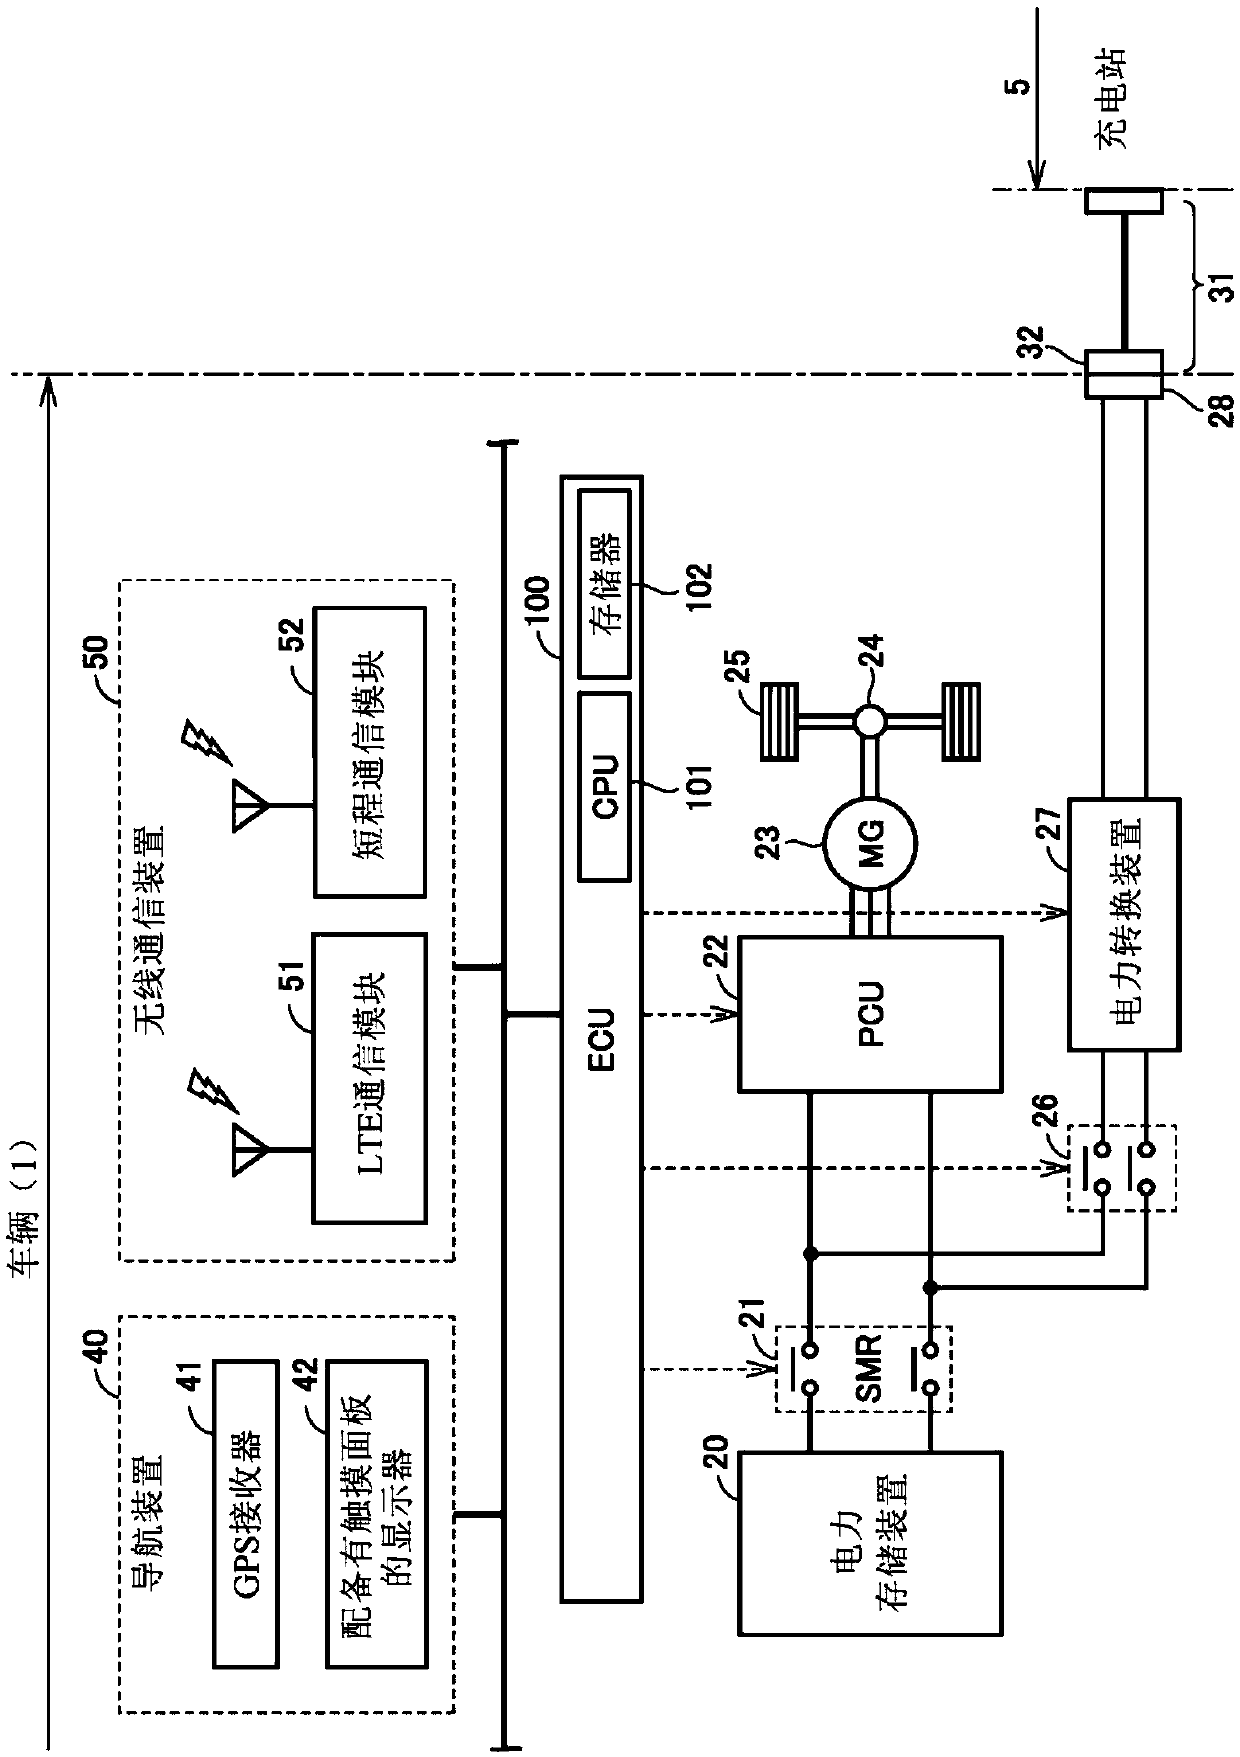 Charging reservation server and charging reservation method for electrically powered vehicle